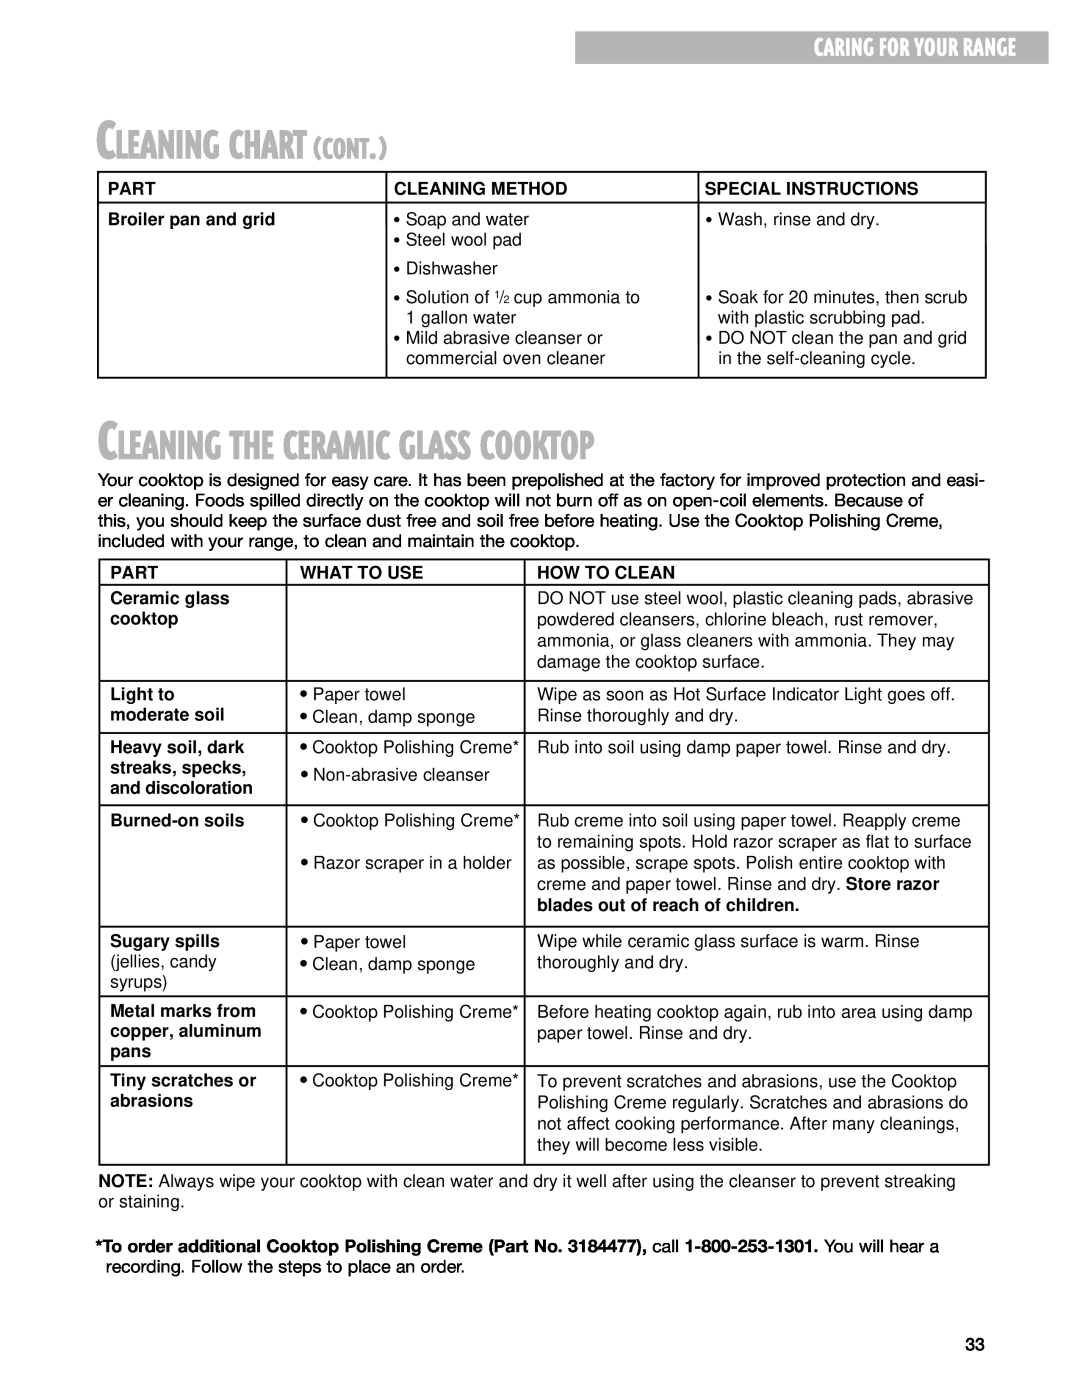 Whirlpool RF199LXH warranty Cleaning Chart Cont, Caring For Your Range, Cleaning The Ceramic Glass Cooktop 